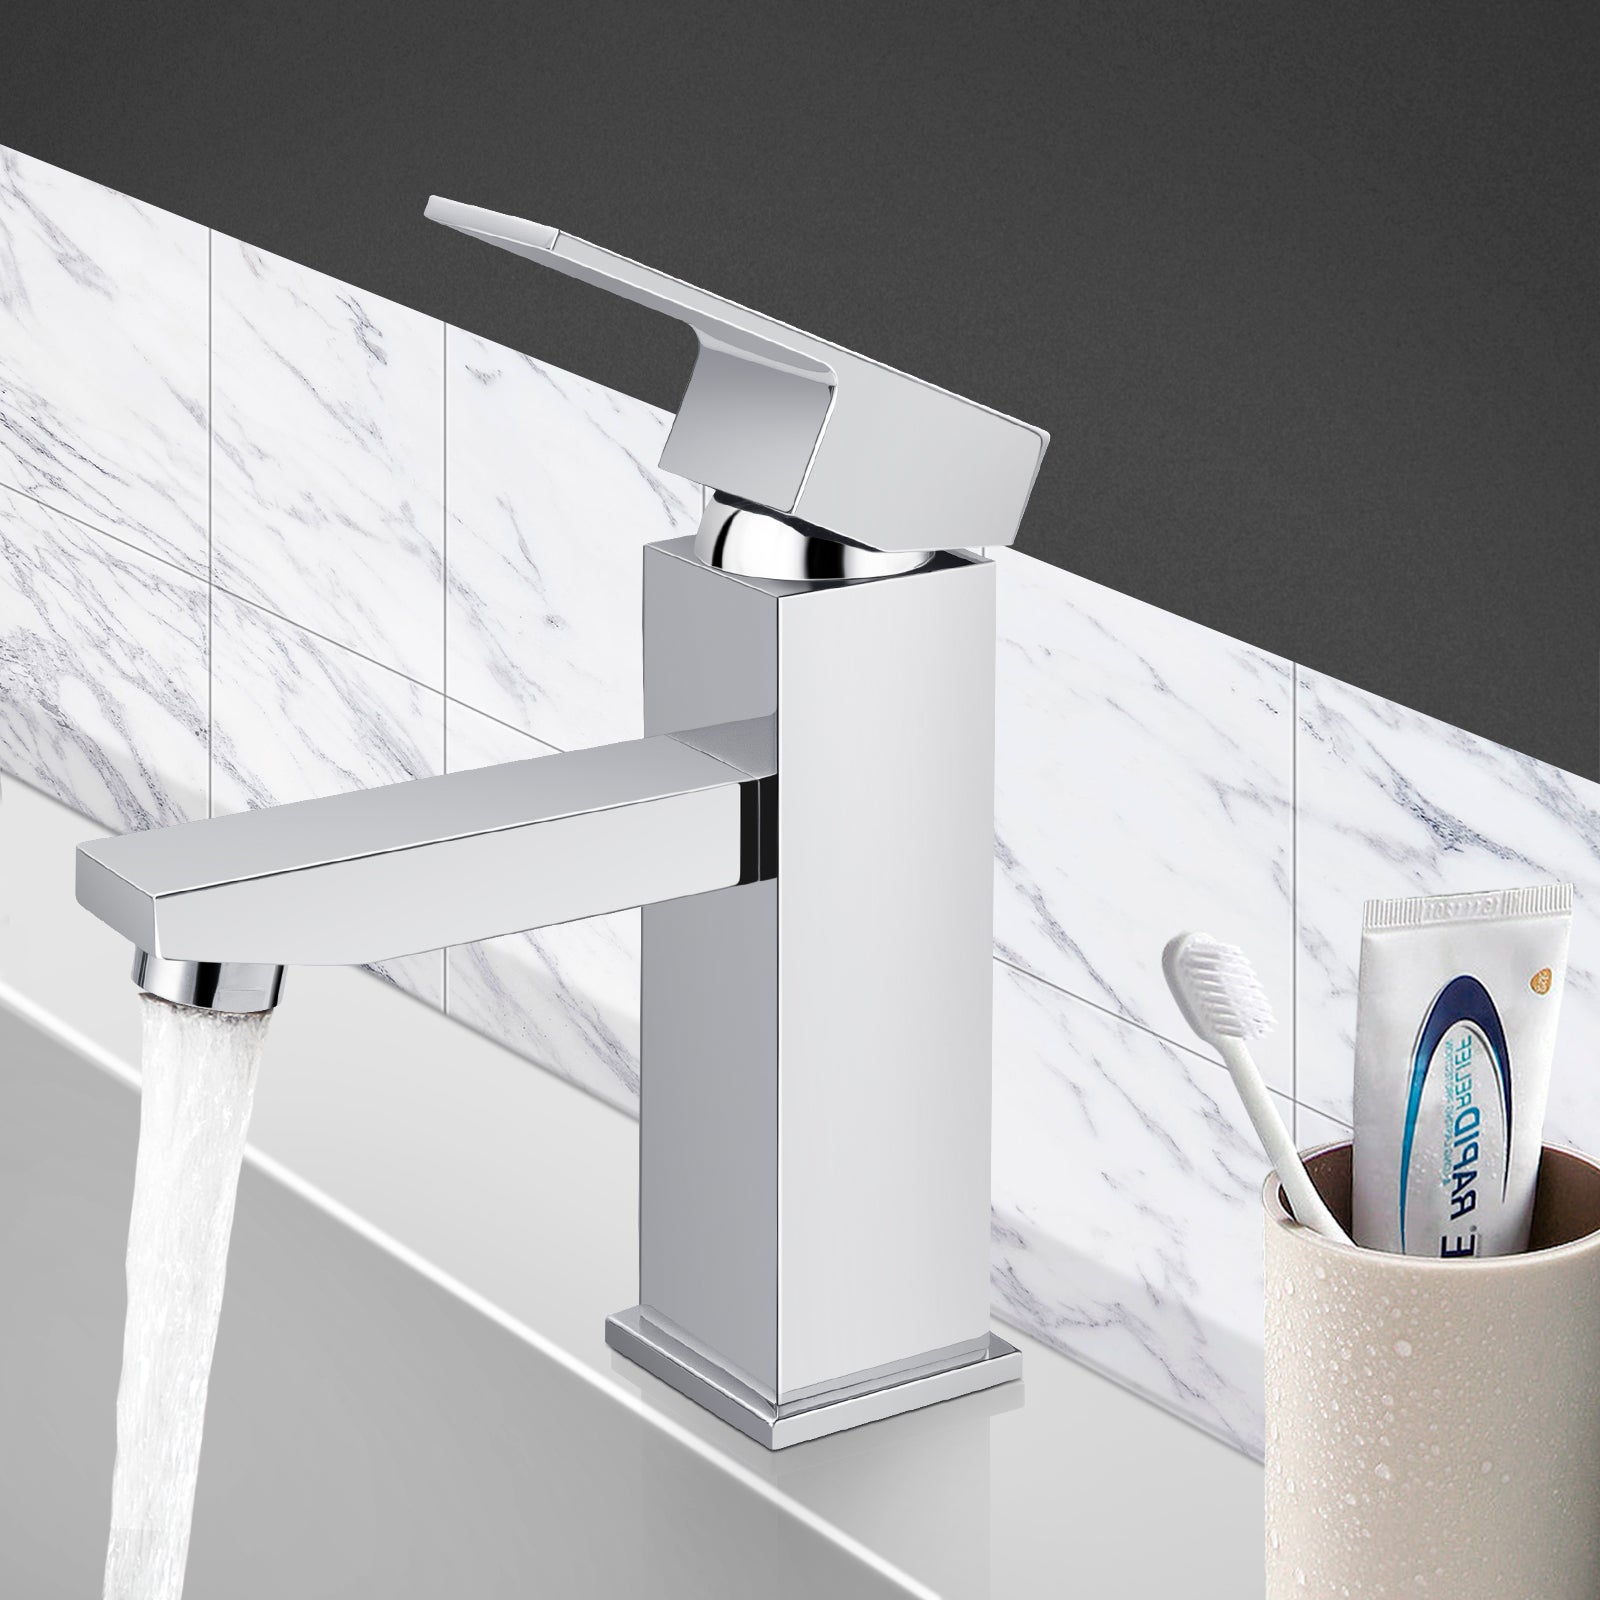 ACA Silver Bathroom Tap Square Mixer Taps Sink Basin Faucet Vanity Counter Top WELS Chrome